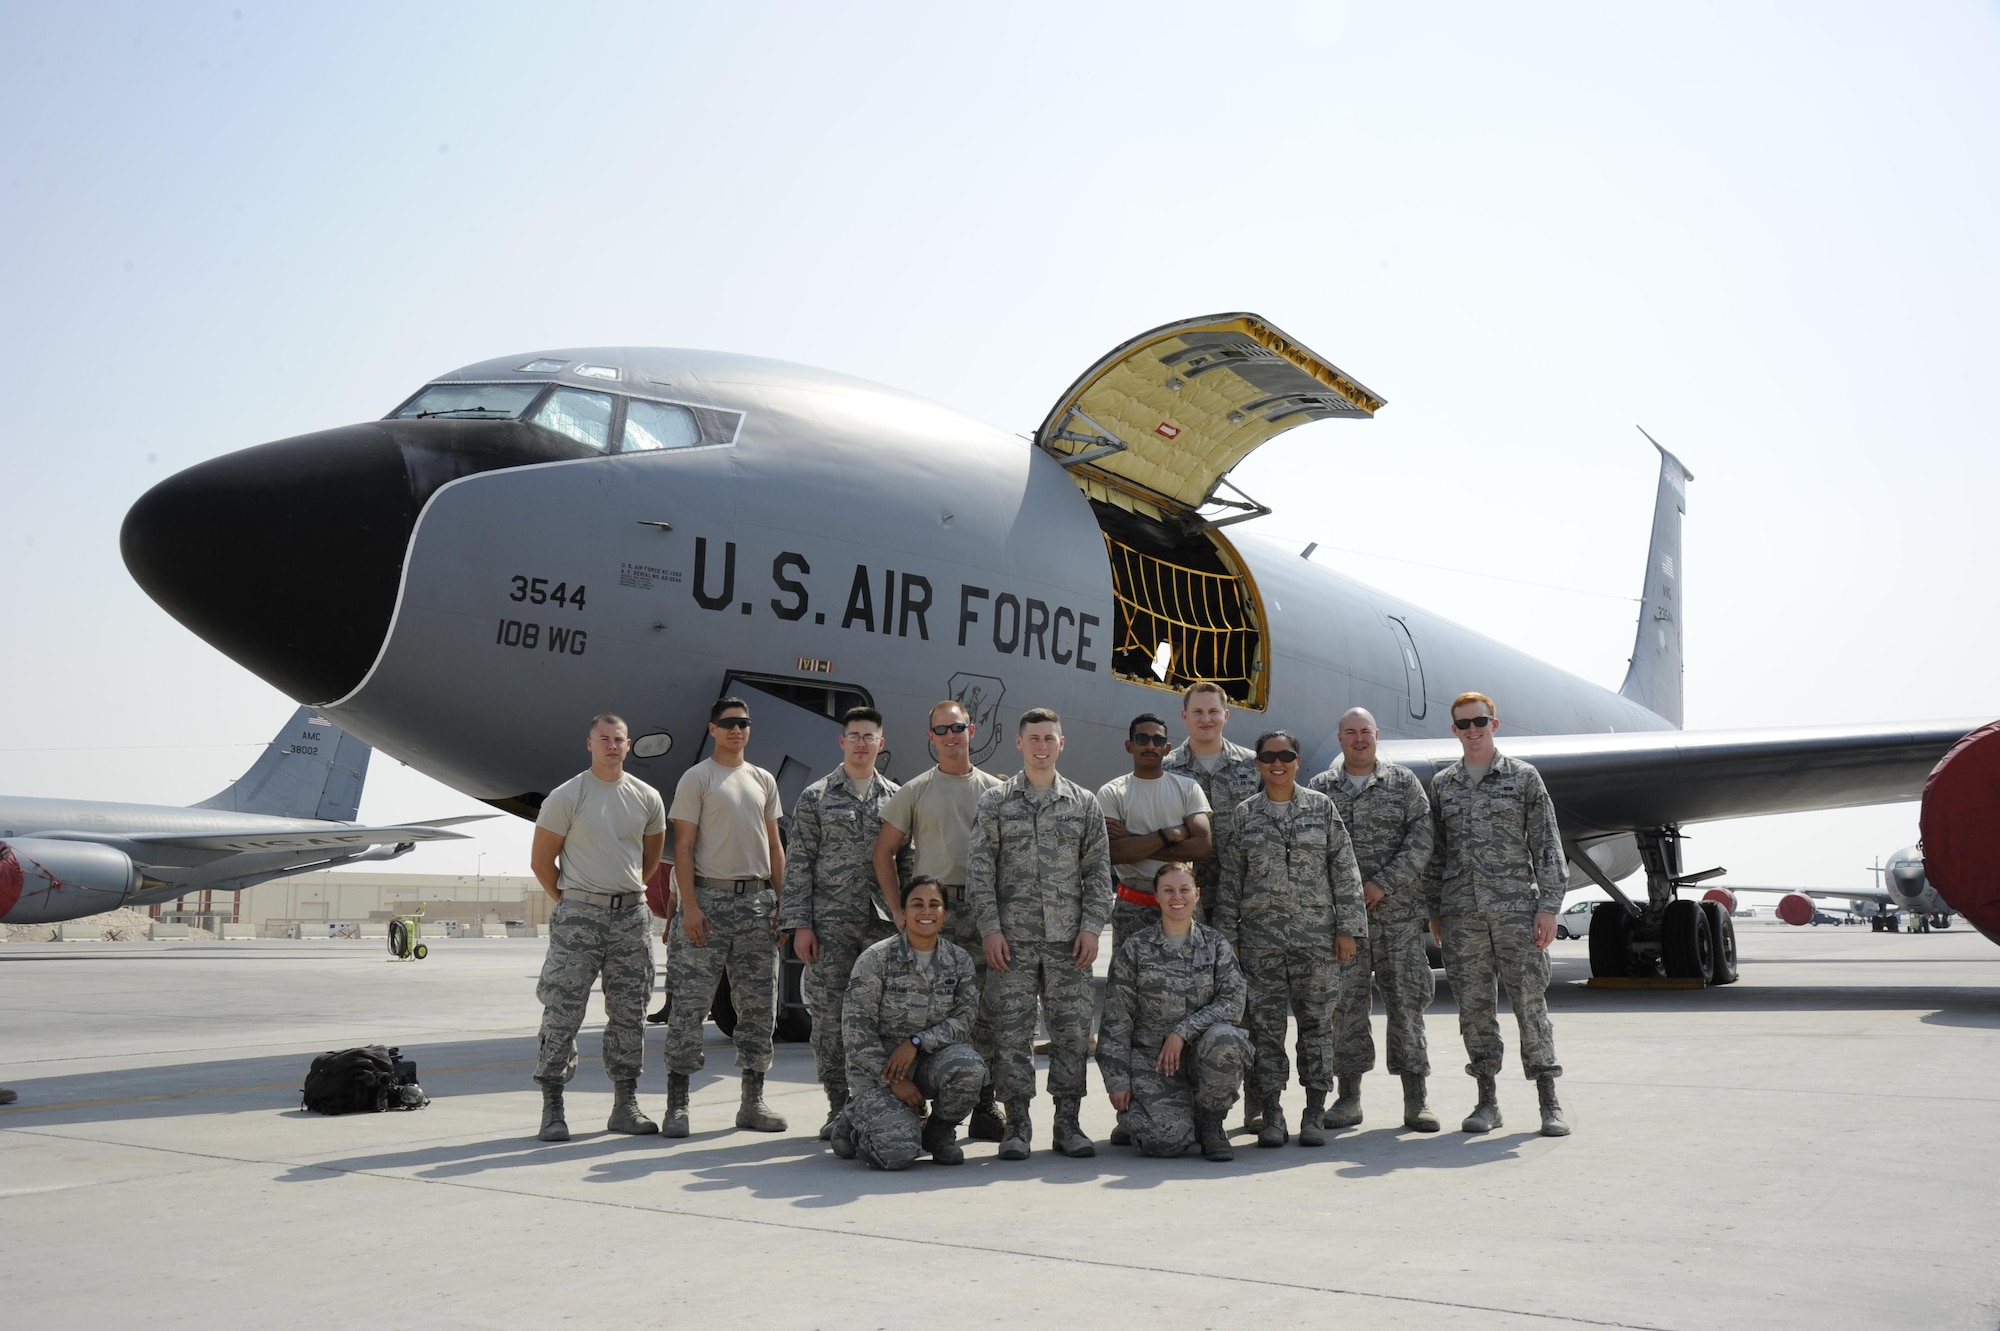 379th Air Expeditionary Wing Airmen pose for a group photo prior to taking an incentive flight at Al Udeid Air Base Oct. 27, 2016. The Airmen learned about the KC-135 Stratotanker during a tour organized in appreciation of the 379th Air Expeditionary Wing Airman’s dedication to the U.S. Air Force mission. (U.S. Air Force Photo by Senior Airman Cynthia A. Innocenti)